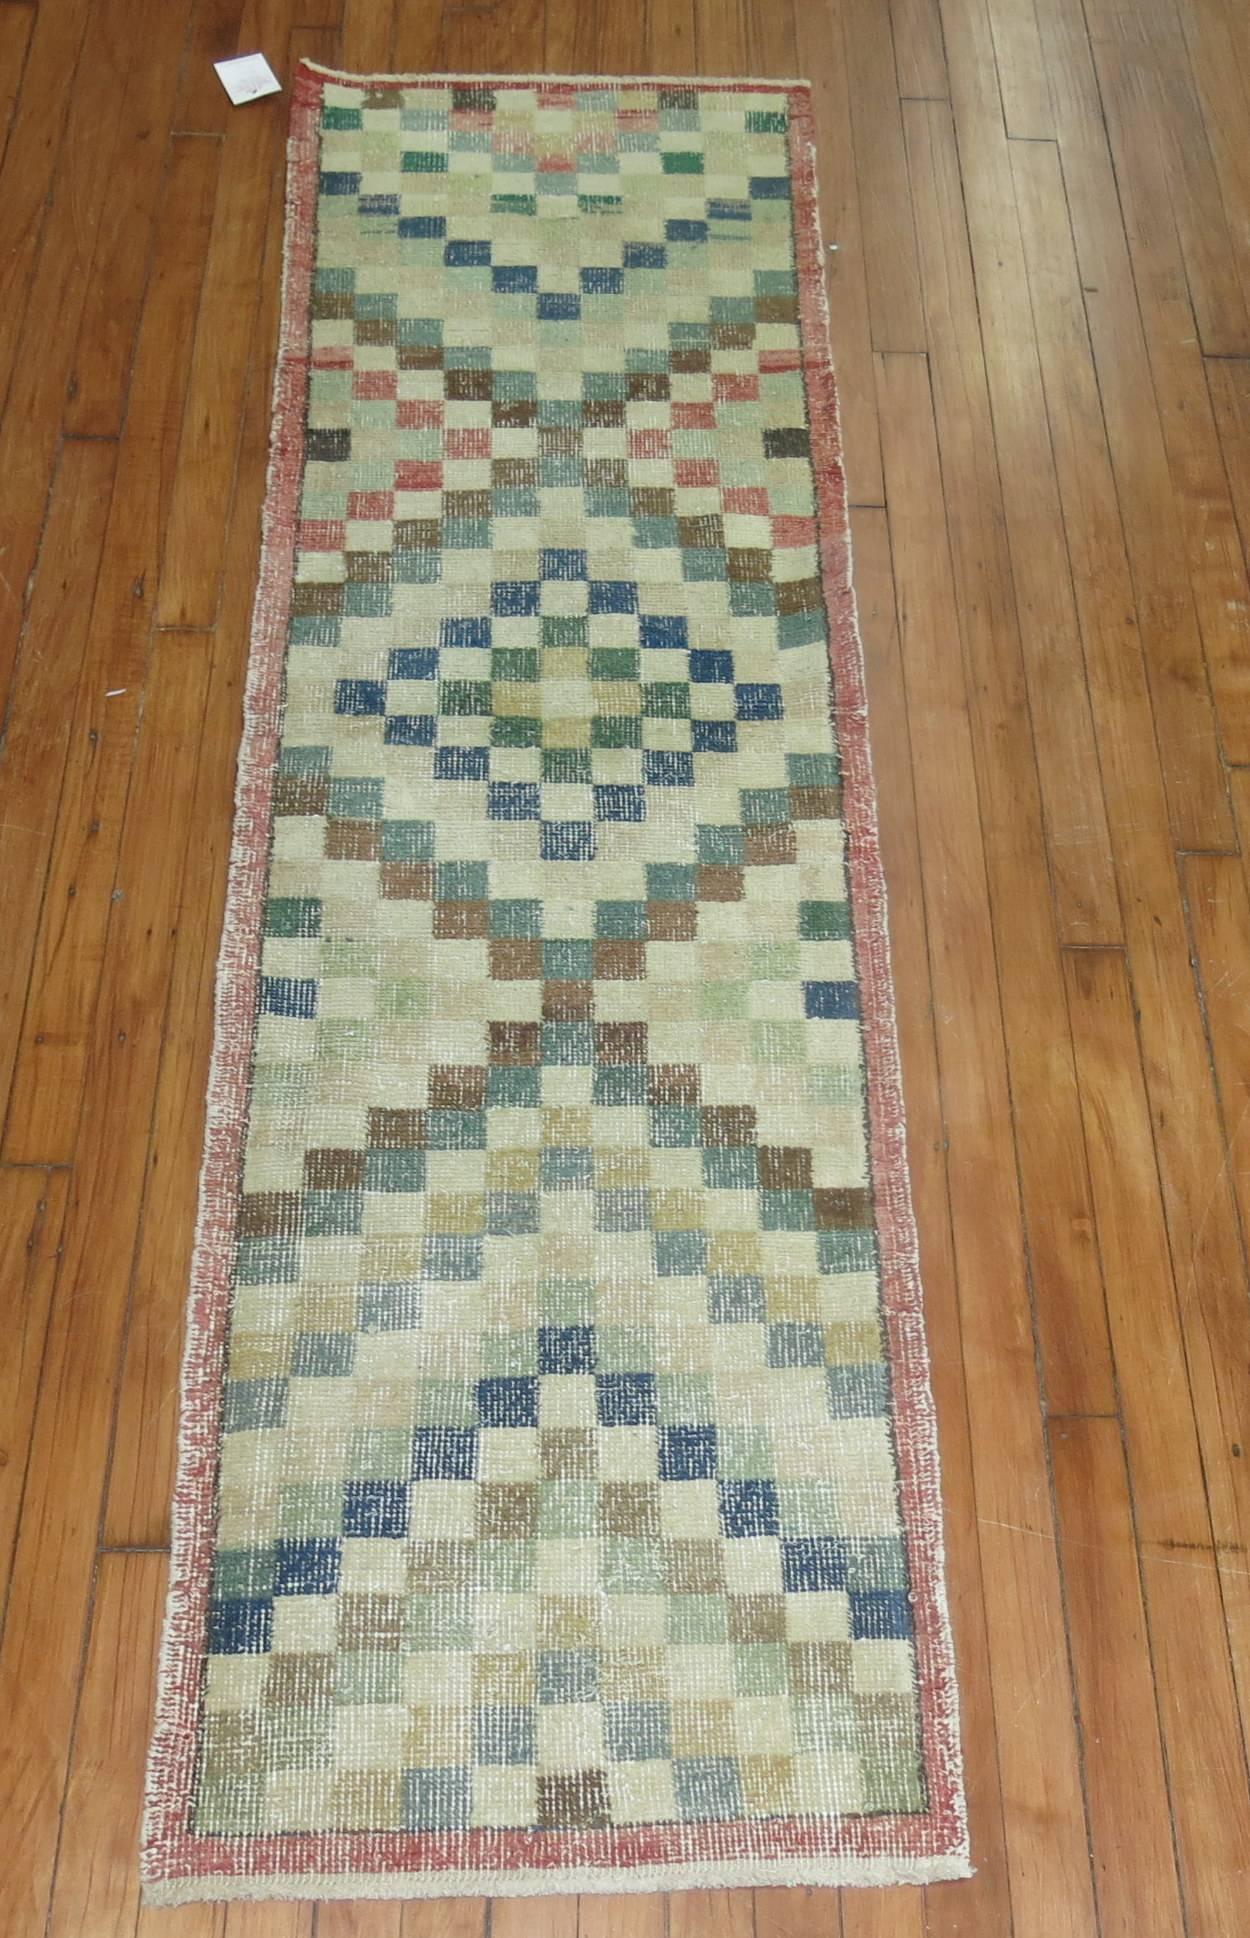 Vintage narrow and short distressed Turkish runner from the middle of the 20th century.

Measures: 1'10